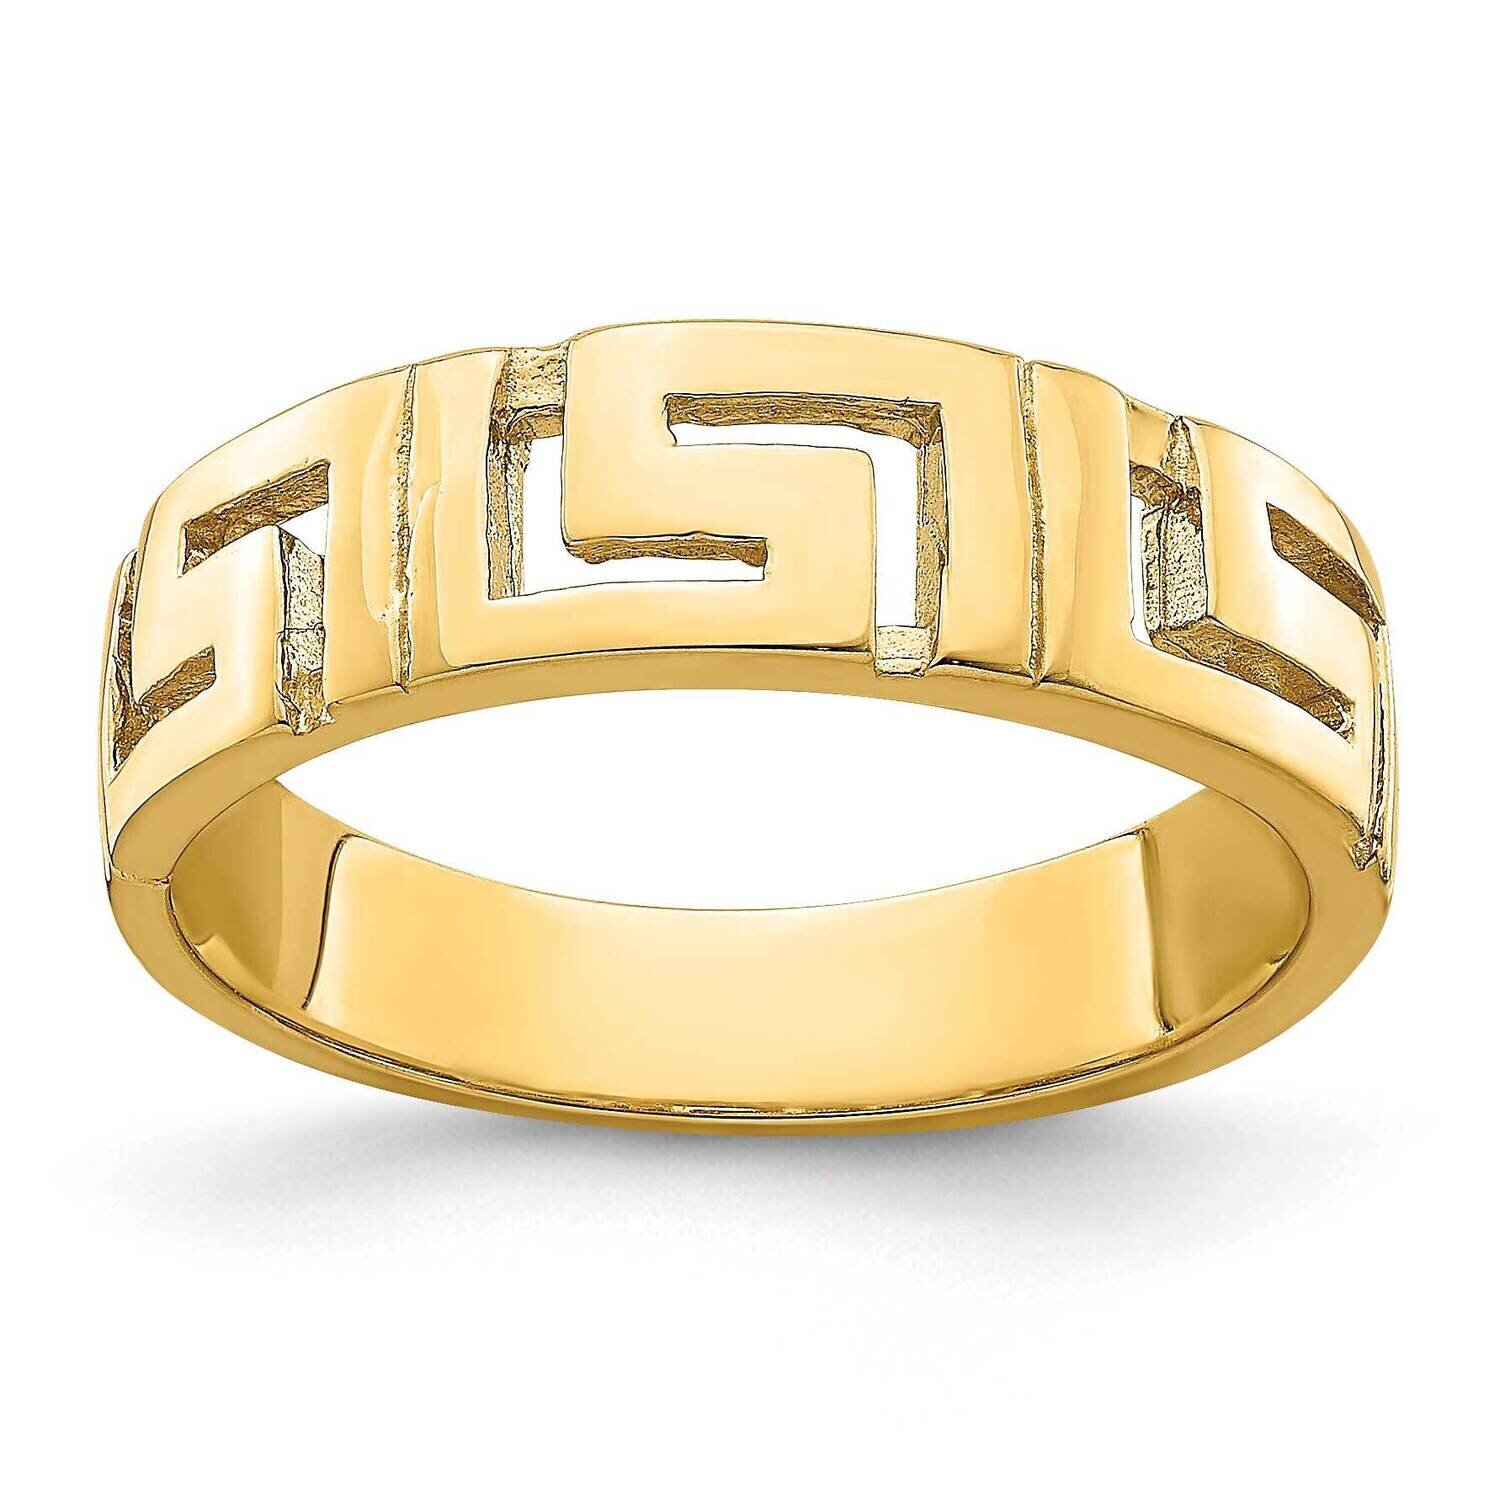 Greek Key Band with Tapered Shank Ring 14k Gold R889